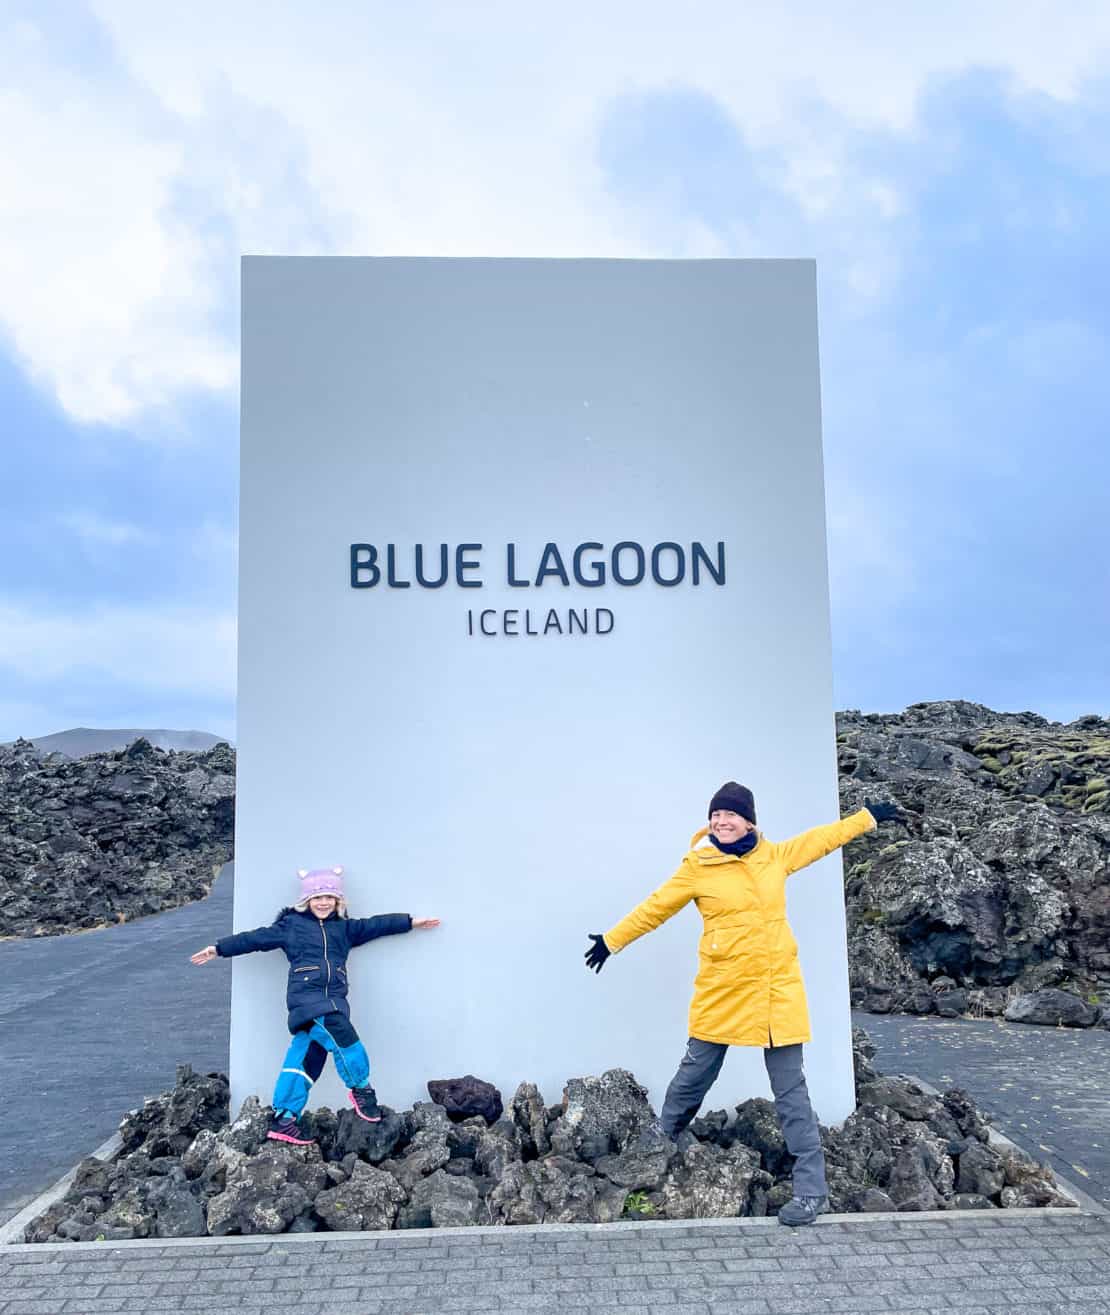 Mother and daughter standing outside the Blue Lagoon sign in Iceland